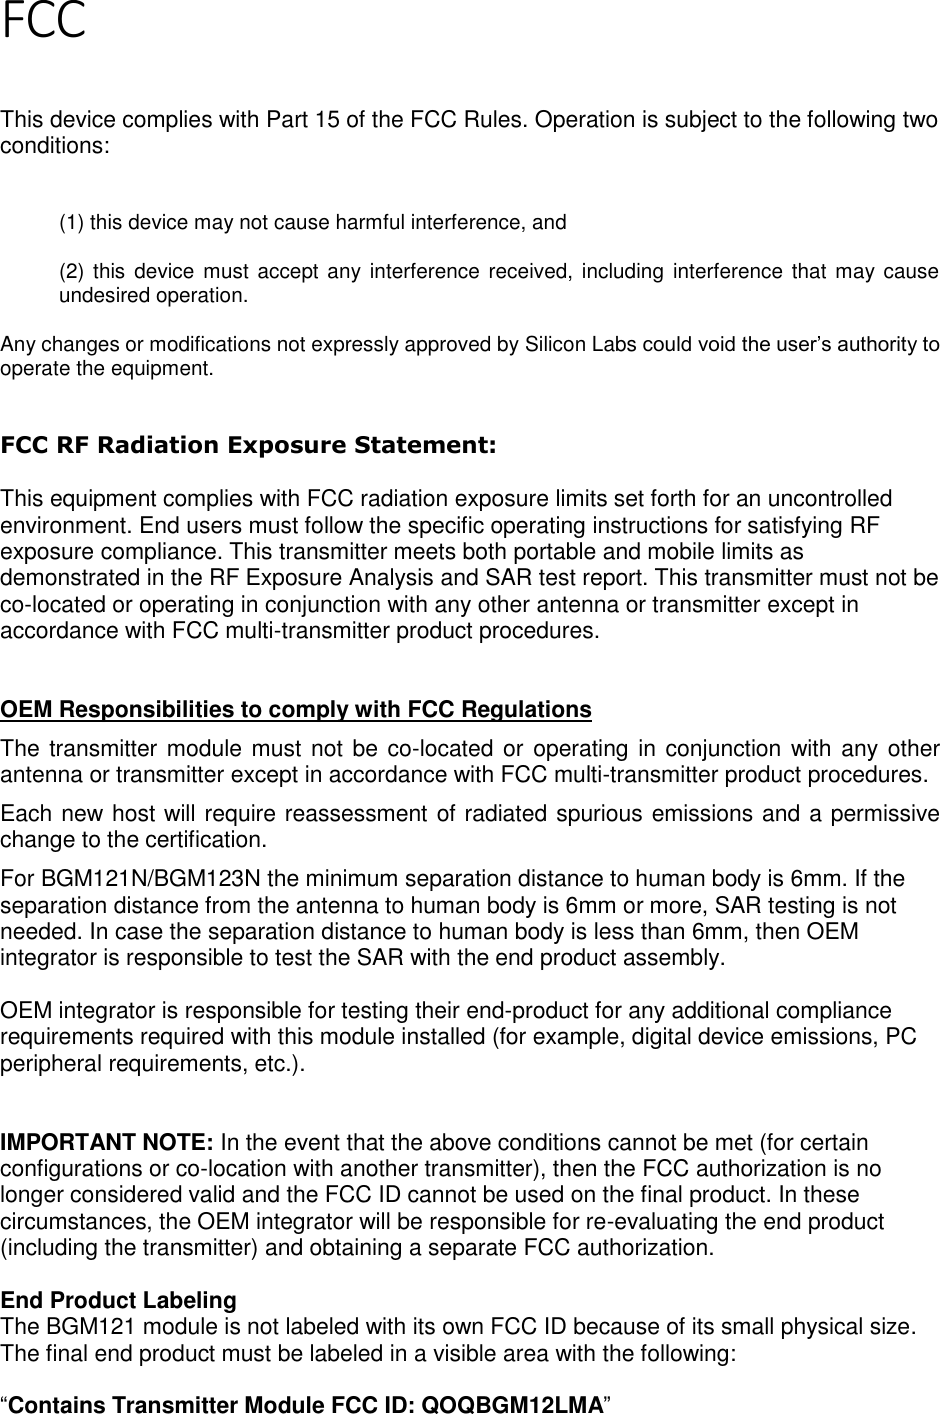 Page 4 of 7 FCC   This device complies with Part 15 of the FCC Rules. Operation is subject to the following two conditions:  (1) this device may not cause harmful interference, and  (2) this device  must accept any interference  received, including  interference that may cause undesired operation. Any changes or modifications not expressly approved by Silicon Labs could void the user’s authority to operate the equipment.  FCC RF Radiation Exposure Statement:  This equipment complies with FCC radiation exposure limits set forth for an uncontrolled environment. End users must follow the specific operating instructions for satisfying RF exposure compliance. This transmitter meets both portable and mobile limits as demonstrated in the RF Exposure Analysis and SAR test report. This transmitter must not be co-located or operating in conjunction with any other antenna or transmitter except in accordance with FCC multi-transmitter product procedures.    OEM Responsibilities to comply with FCC Regulations The transmitter module must not be co-located or operating in conjunction with any other antenna or transmitter except in accordance with FCC multi-transmitter product procedures.  Each new host will require reassessment of radiated spurious emissions and a permissive change to the certification. For BGM121N/BGM123N the minimum separation distance to human body is 6mm. If the separation distance from the antenna to human body is 6mm or more, SAR testing is not needed. In case the separation distance to human body is less than 6mm, then OEM integrator is responsible to test the SAR with the end product assembly.   OEM integrator is responsible for testing their end-product for any additional compliance requirements required with this module installed (for example, digital device emissions, PC peripheral requirements, etc.).   IMPORTANT NOTE: In the event that the above conditions cannot be met (for certain configurations or co-location with another transmitter), then the FCC authorization is no longer considered valid and the FCC ID cannot be used on the final product. In these circumstances, the OEM integrator will be responsible for re-evaluating the end product (including the transmitter) and obtaining a separate FCC authorization.  End Product Labeling The BGM121 module is not labeled with its own FCC ID because of its small physical size. The final end product must be labeled in a visible area with the following:   “Contains Transmitter Module FCC ID: QOQBGM12LMA” 